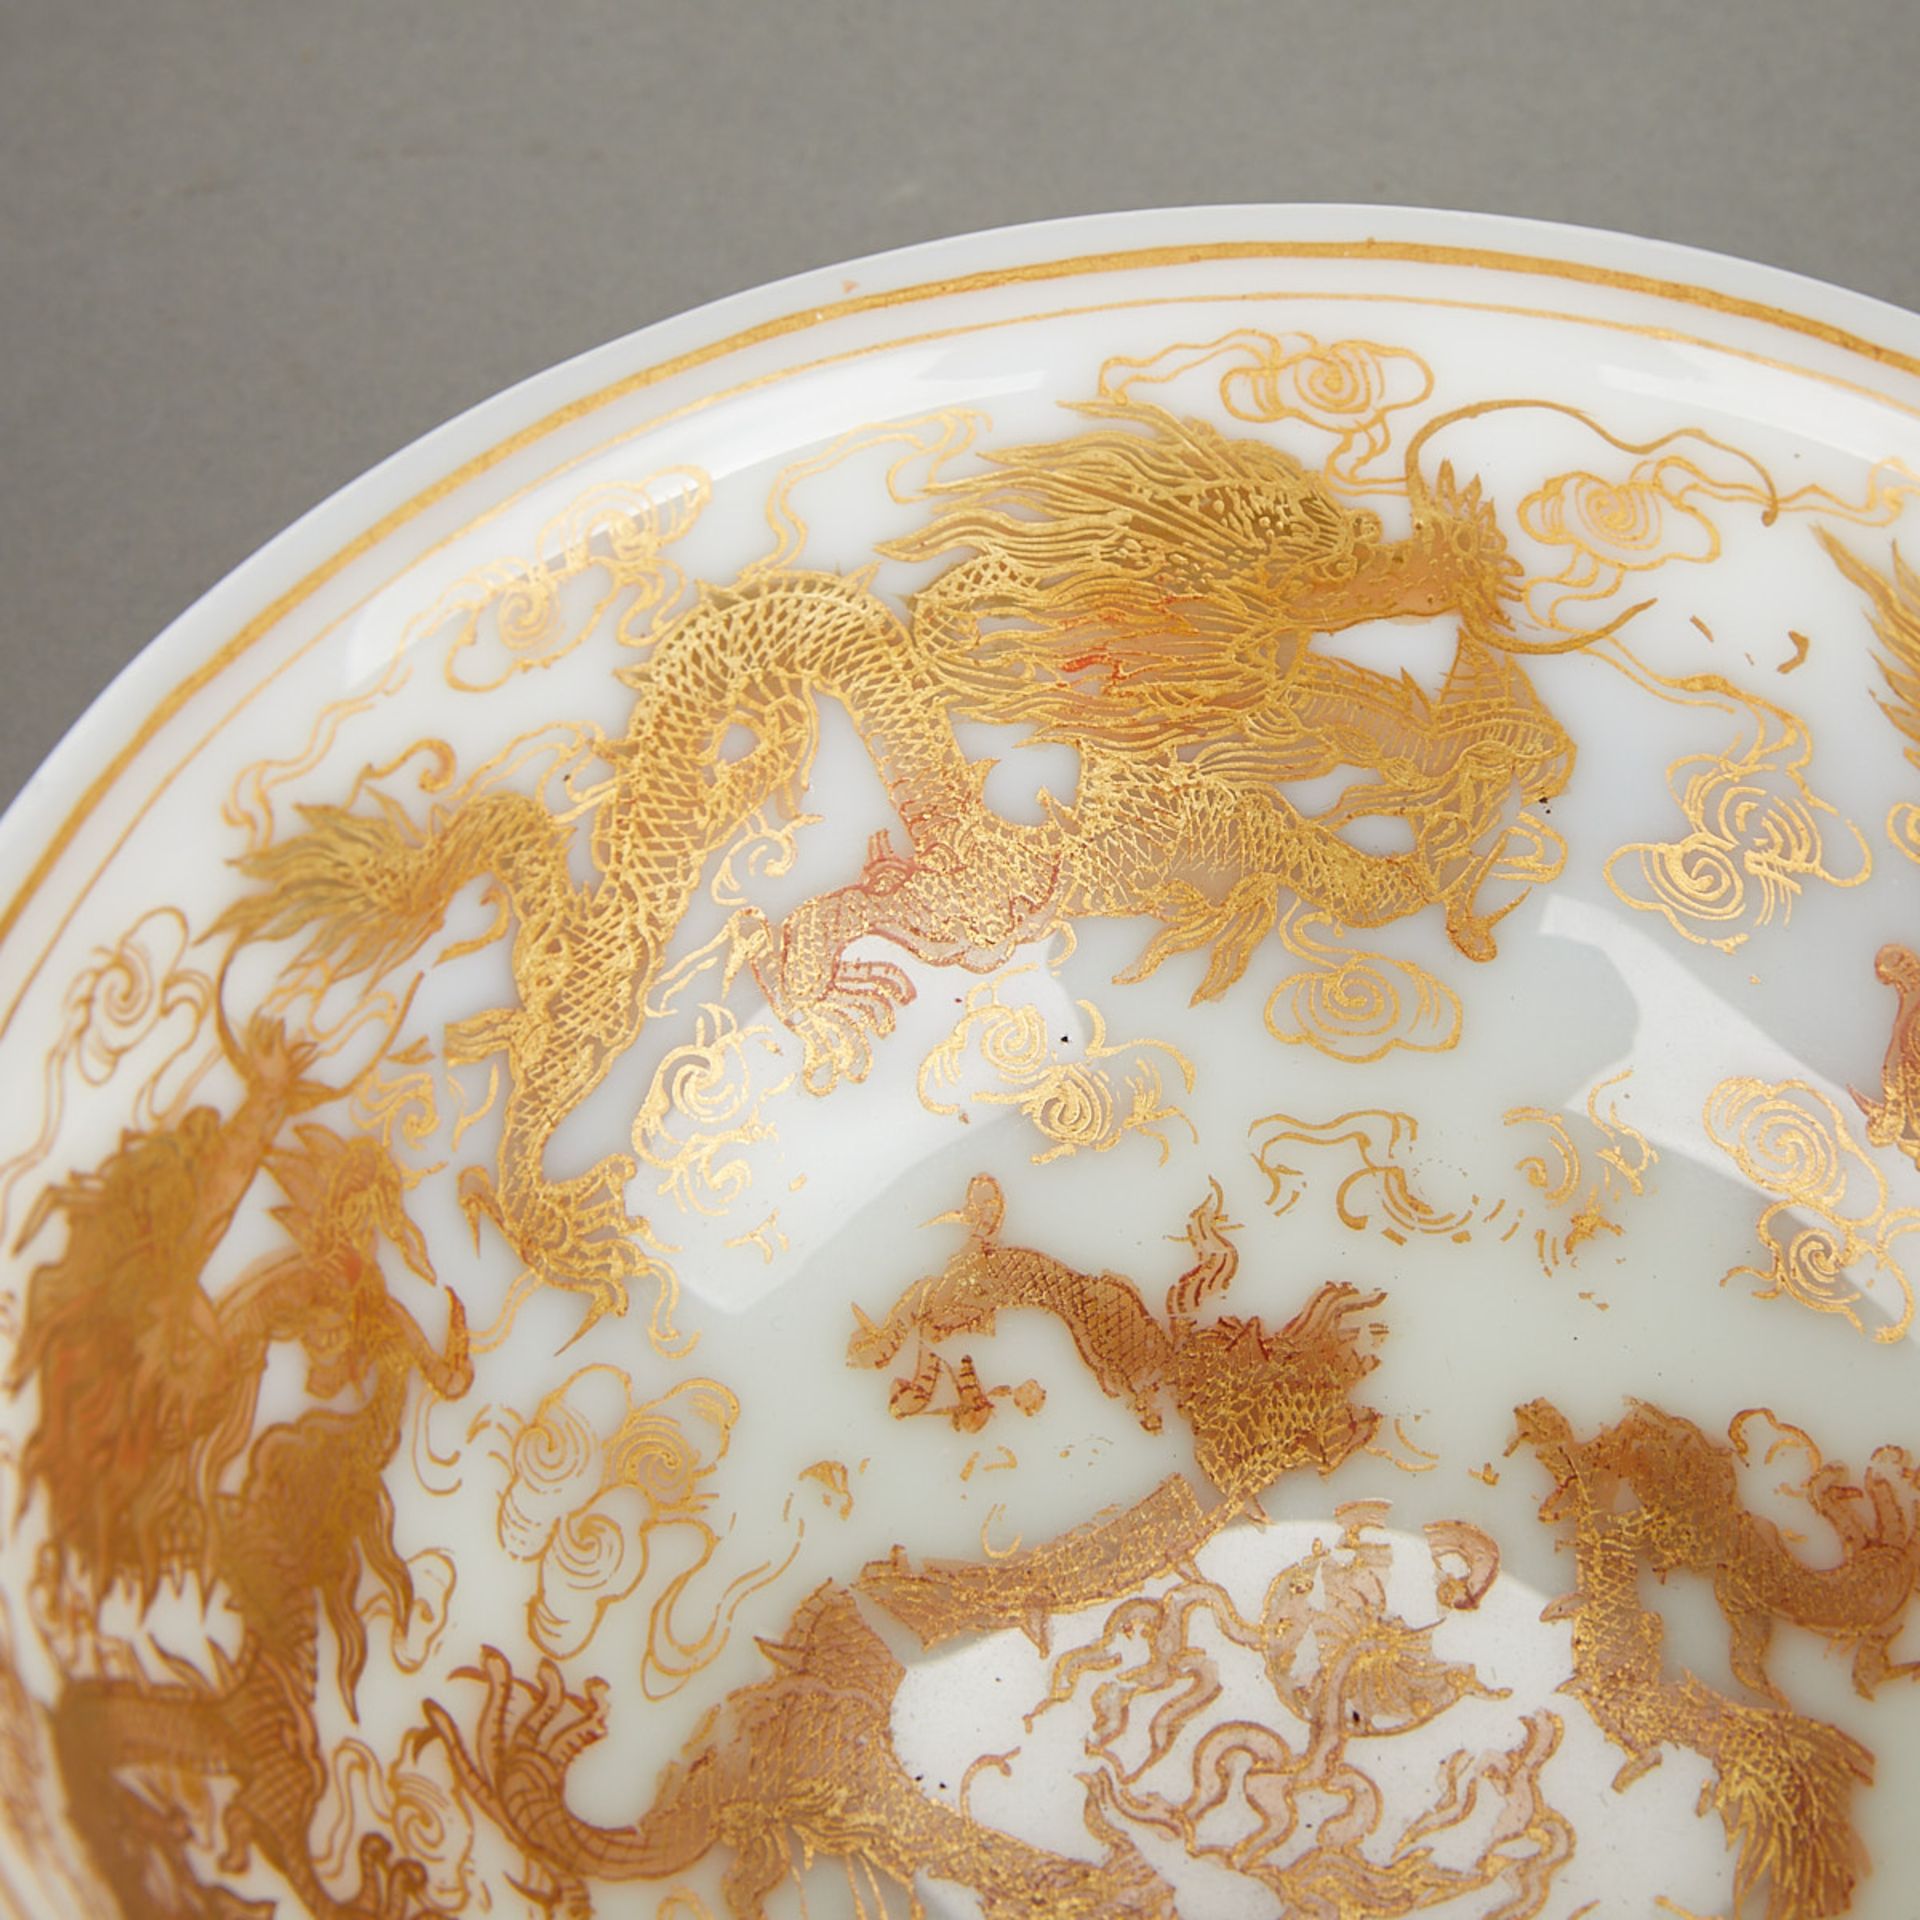 Rare Chinese Gilt Semi-Opaque White Glass Bowl - Image 7 of 16